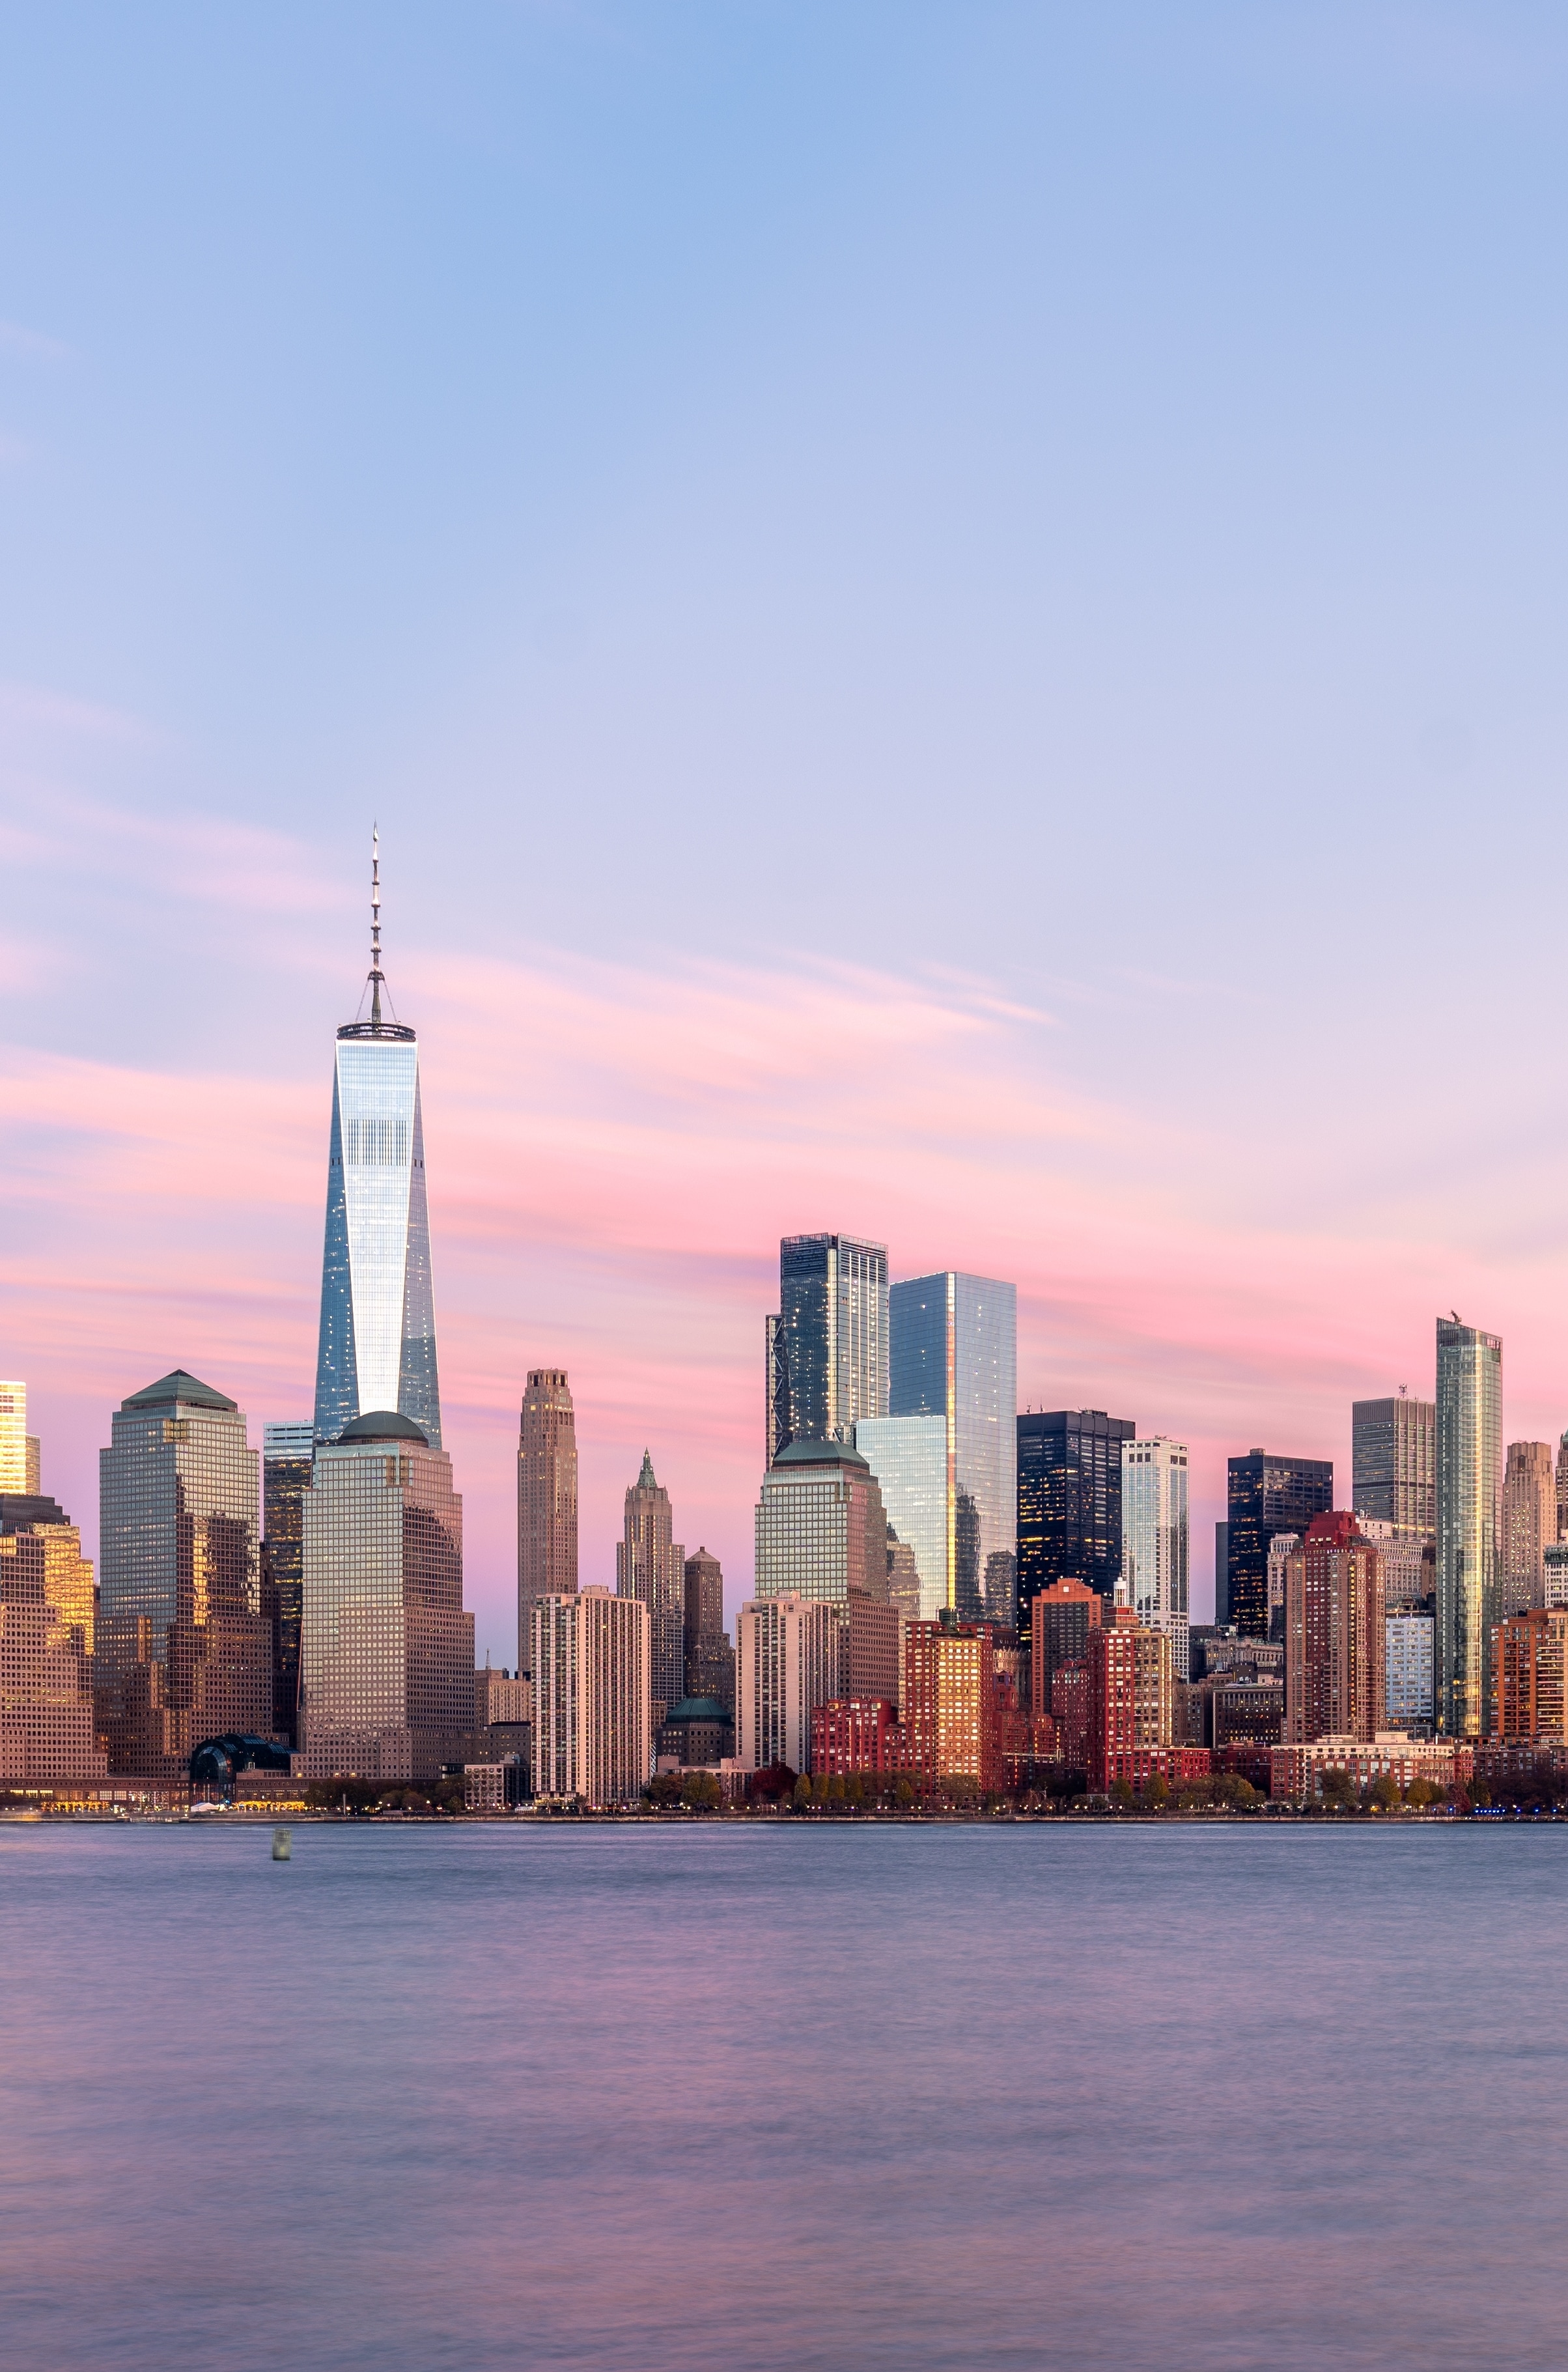 The skyline of New York City at dusk, featuring One World Trade Center 